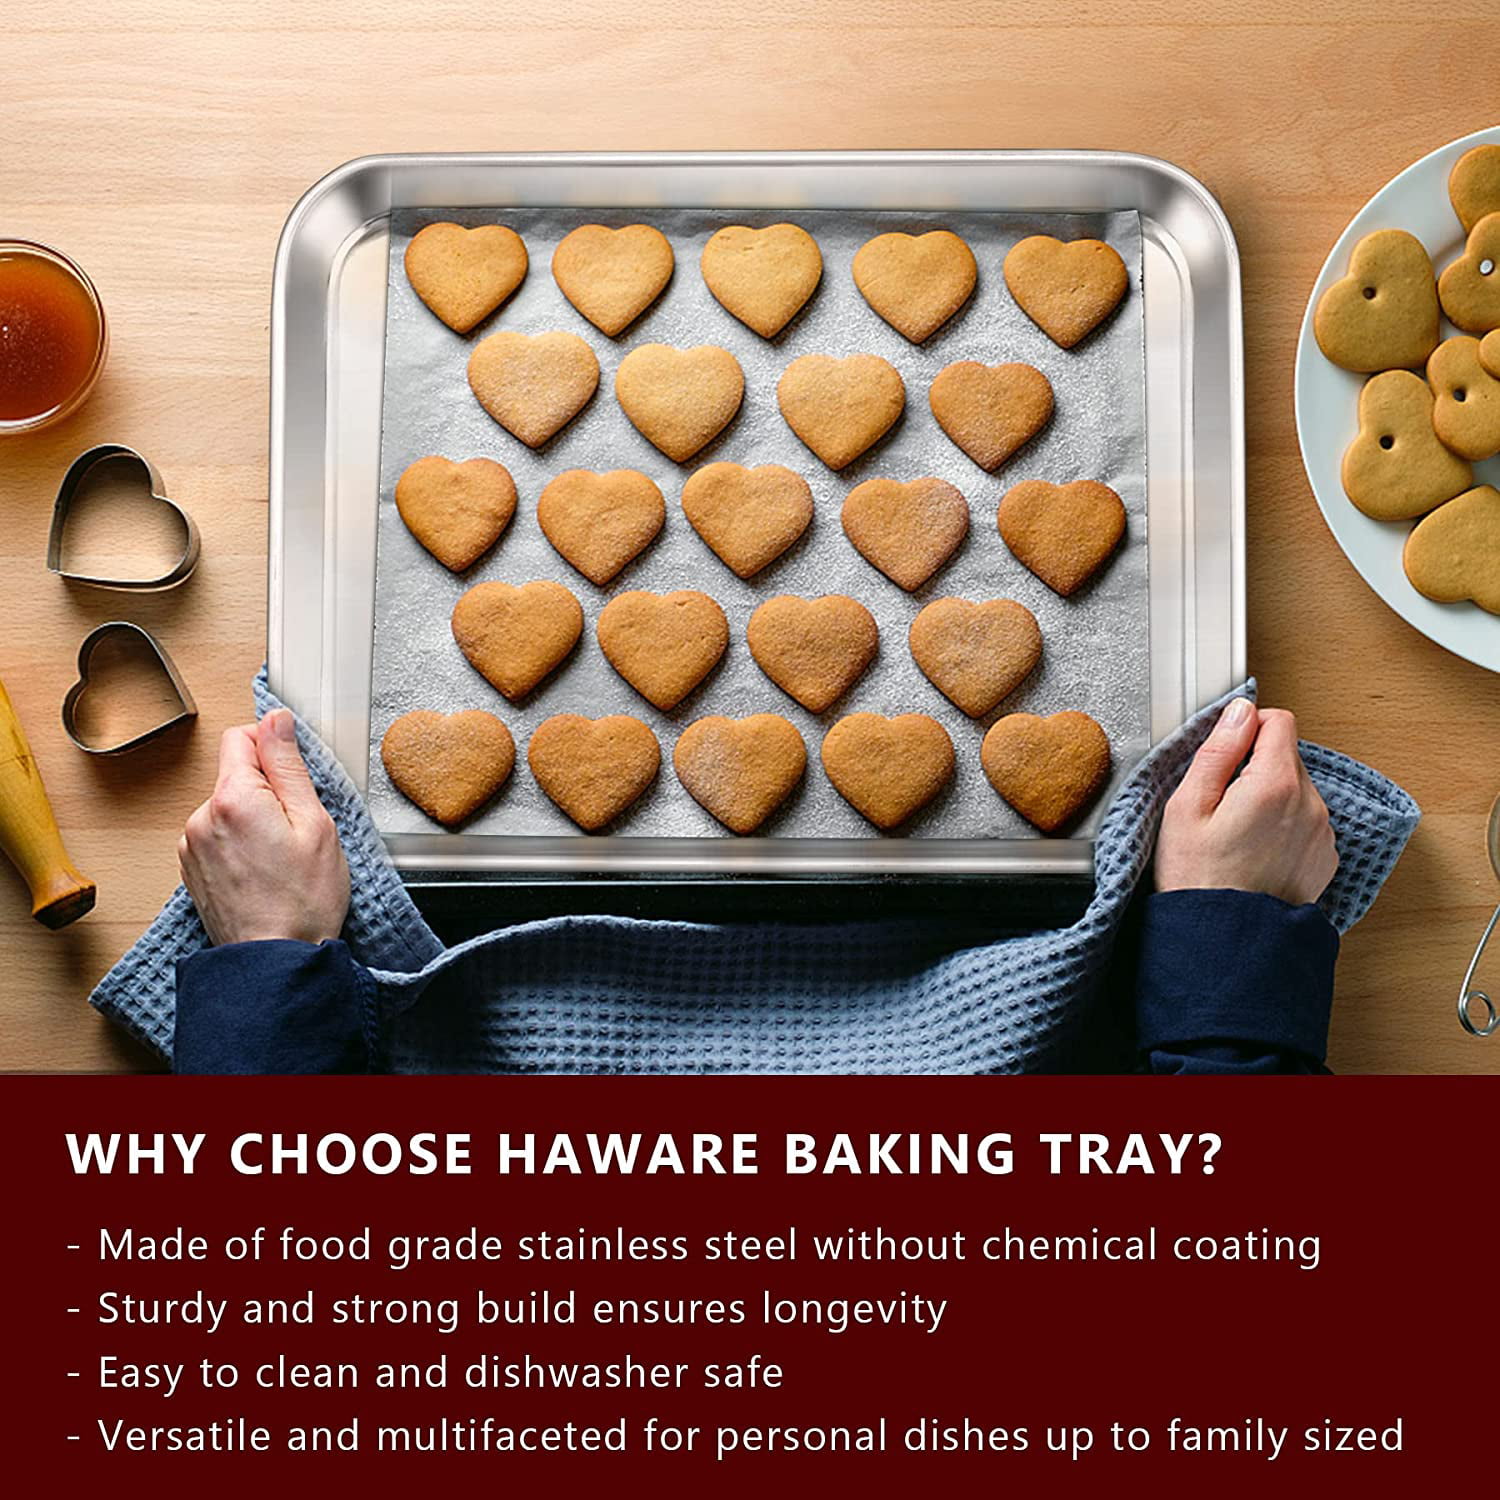 Aluminum Commercial Baker's Half Sheet, Bakeware Cookie Oven Baking Pan  Tray.barbecue, Bread, Cake, Cookie Sheet Baking Tray Pan, Healthy & Non  Toxic, Mirror Finish & Rust Free, Easy Clean & Dishwasher Safe